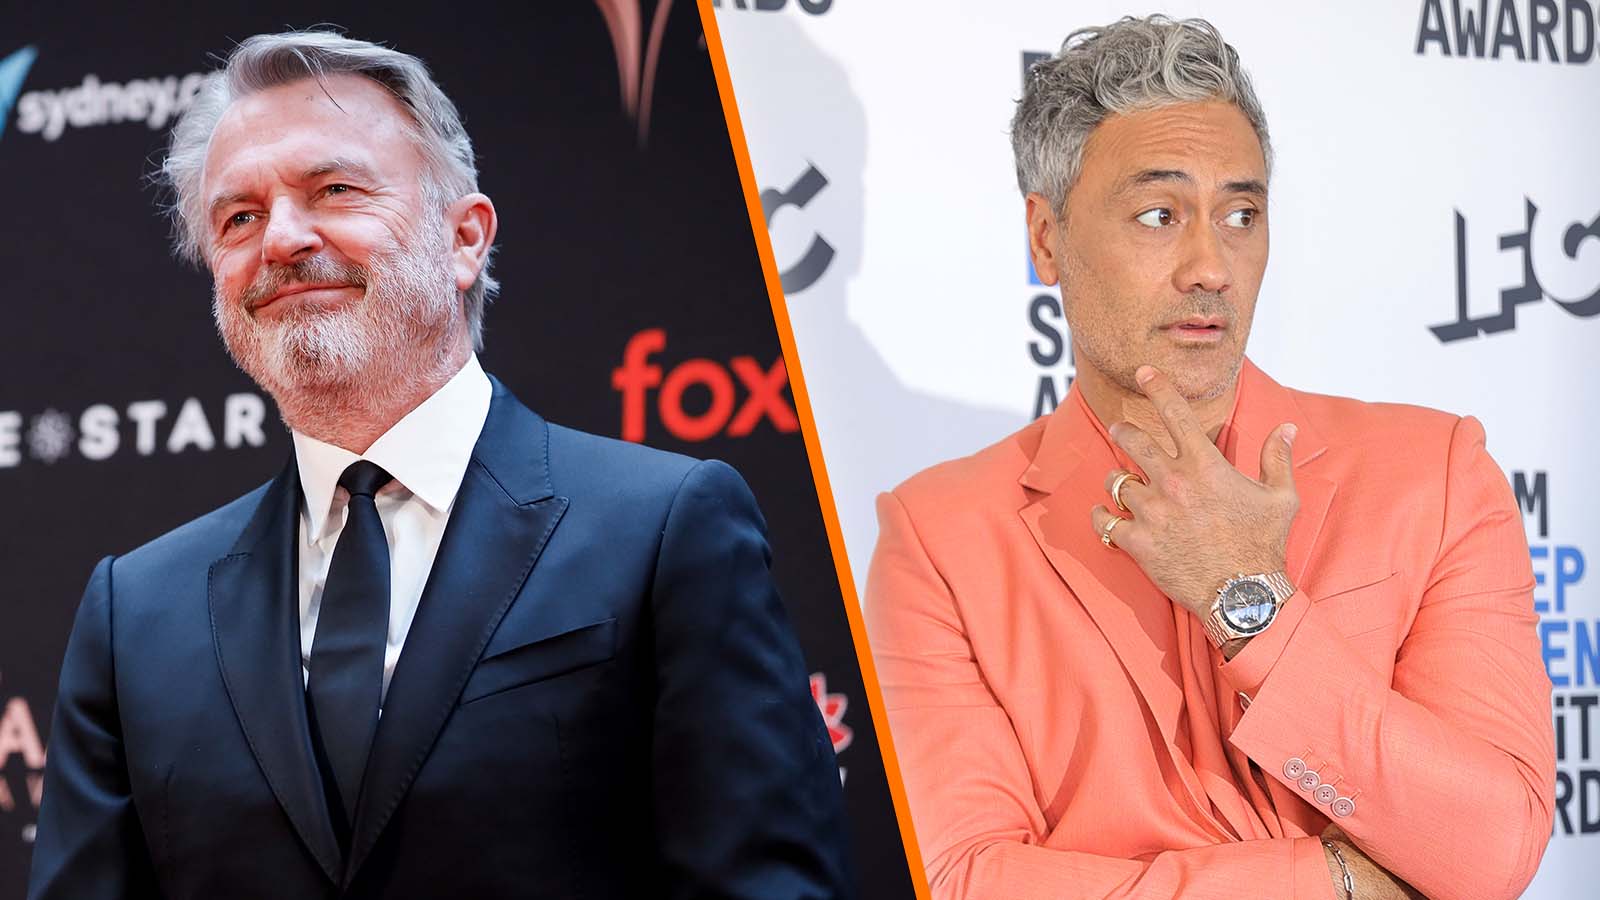 Sam Neill provides video evidence of Taika Waititi stealing grapes from his vineyard